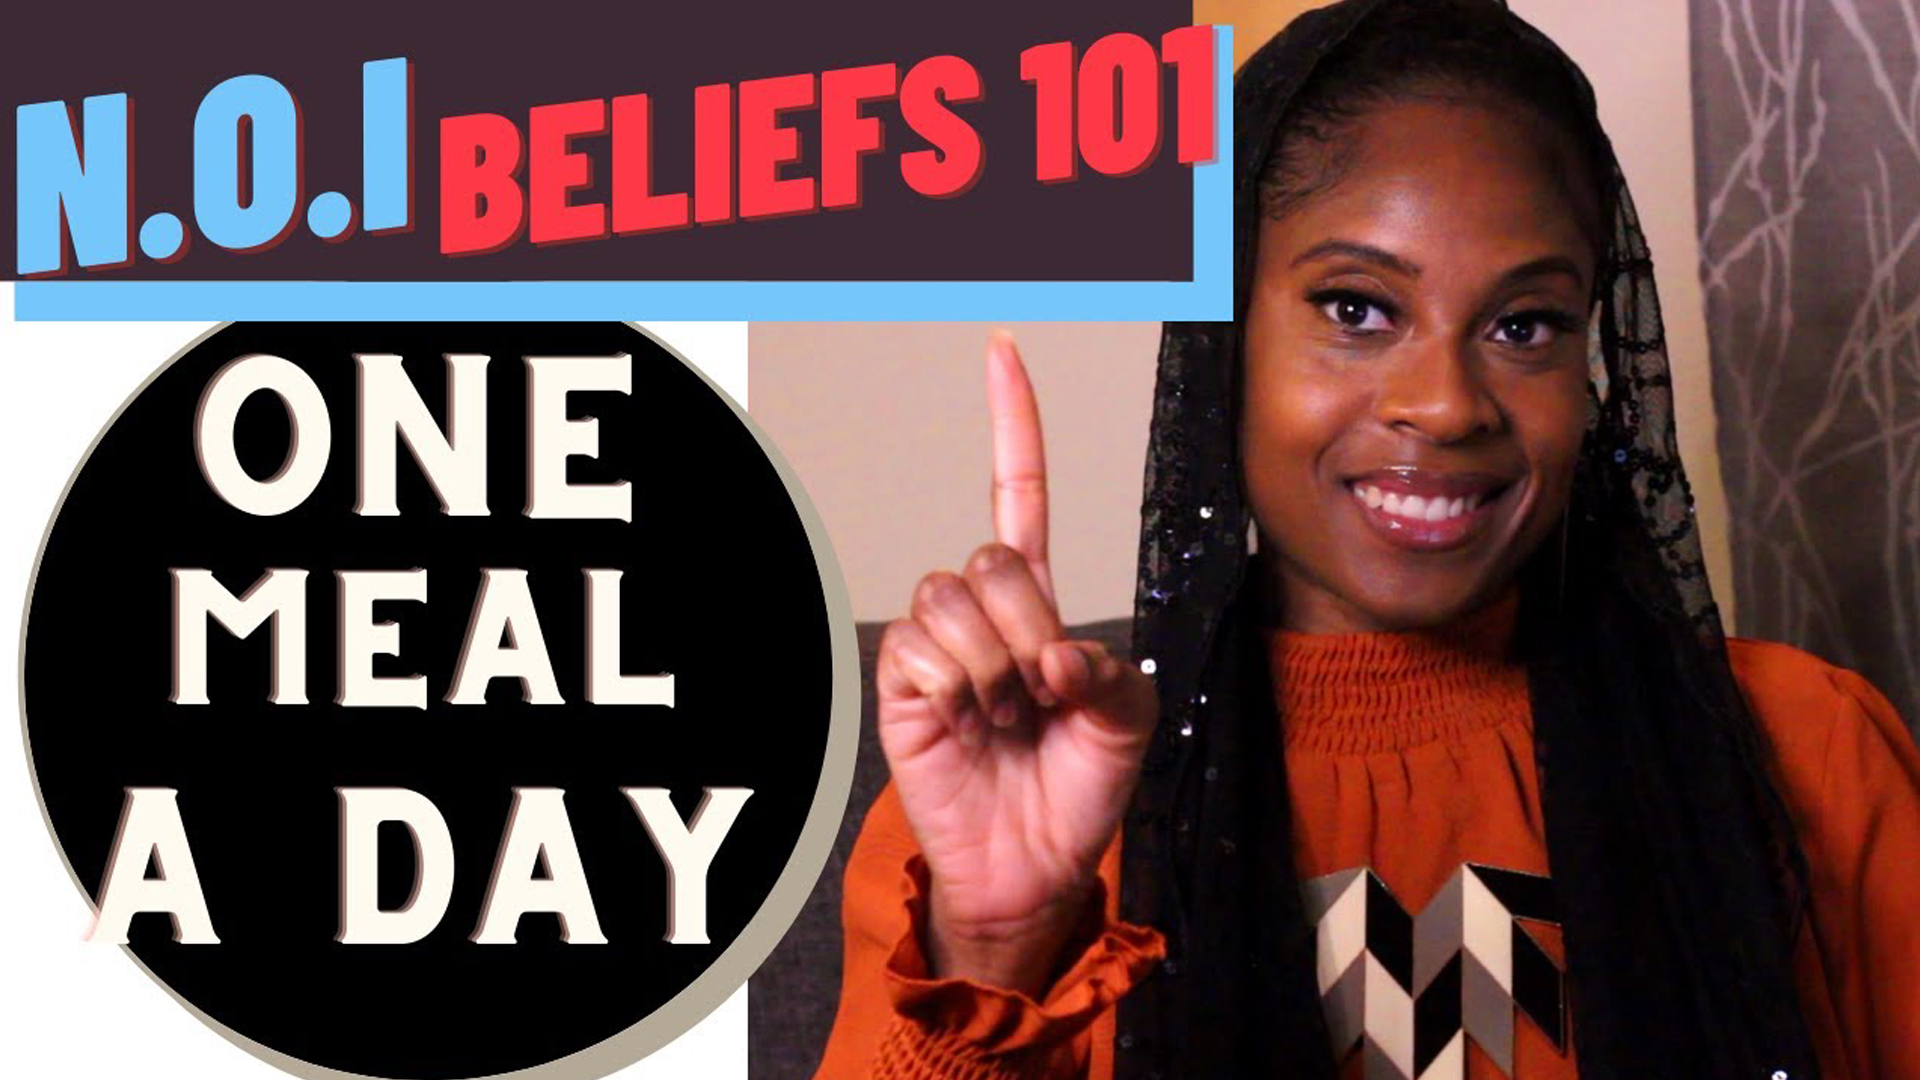 Nation of Islam Beliefs 101: Eat One Meal a Day